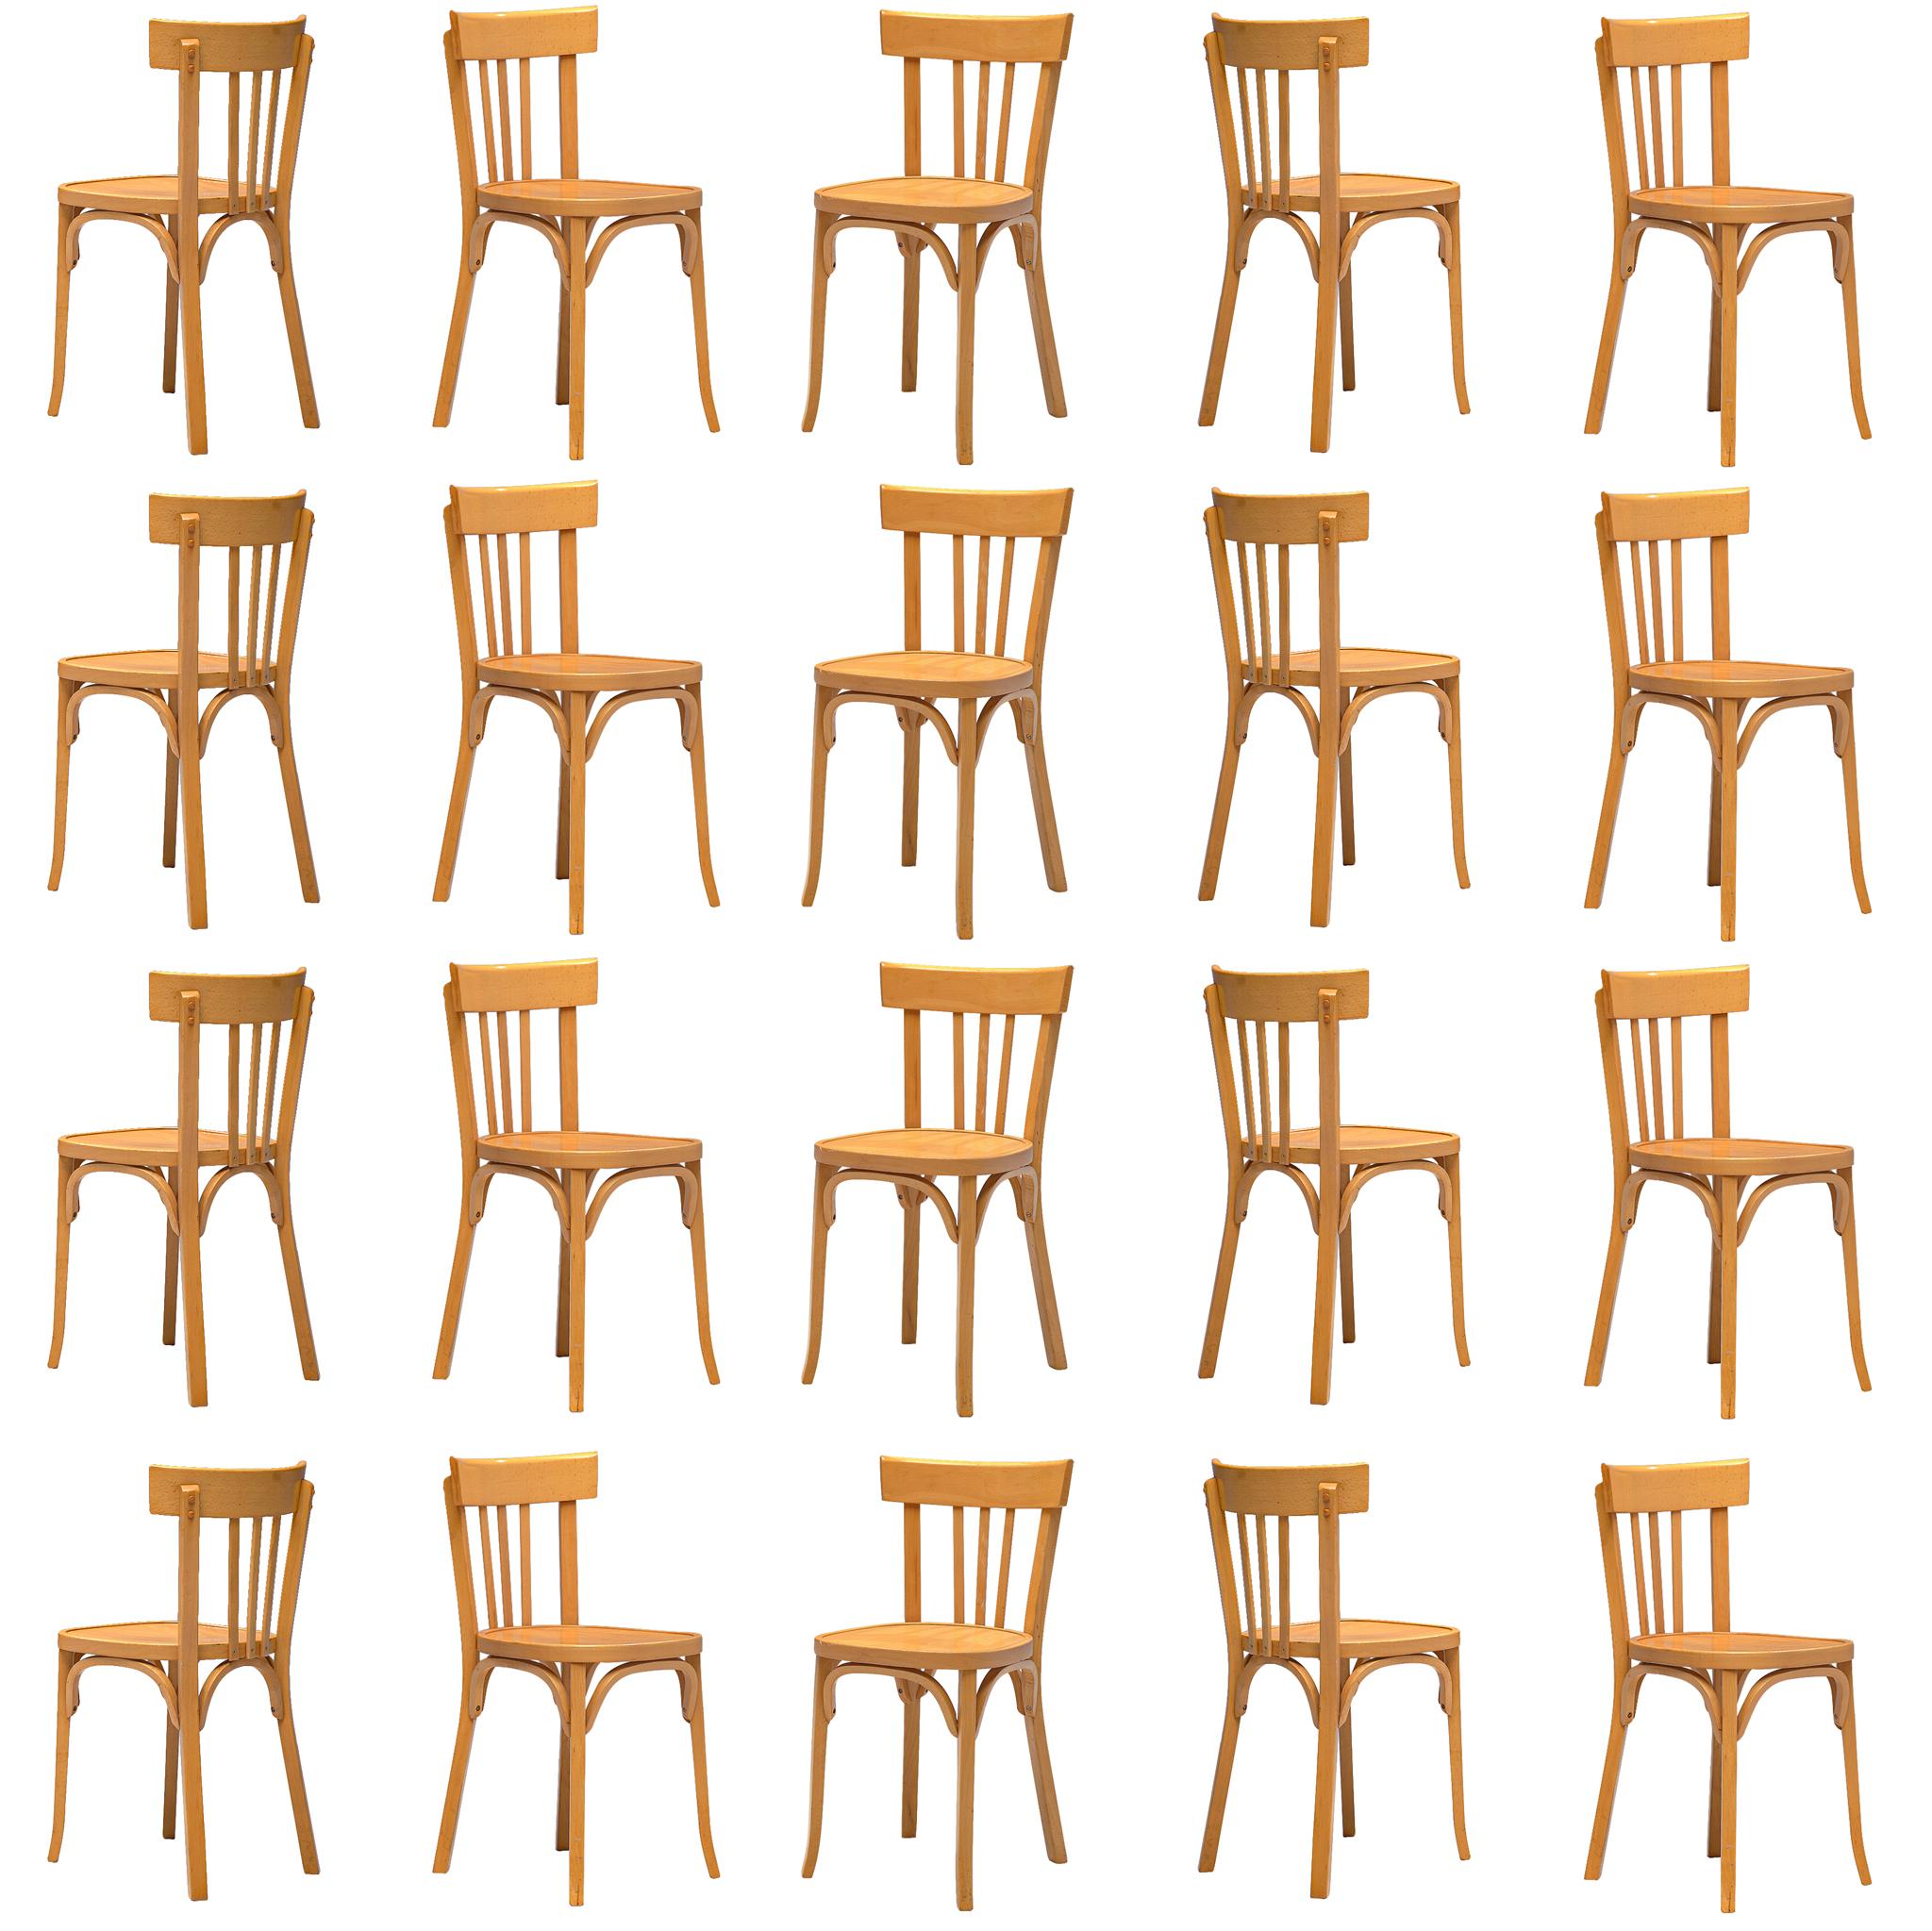 Large Set of Baumann Dining Chairs , 100 +, in Beechwood, France, 1970s